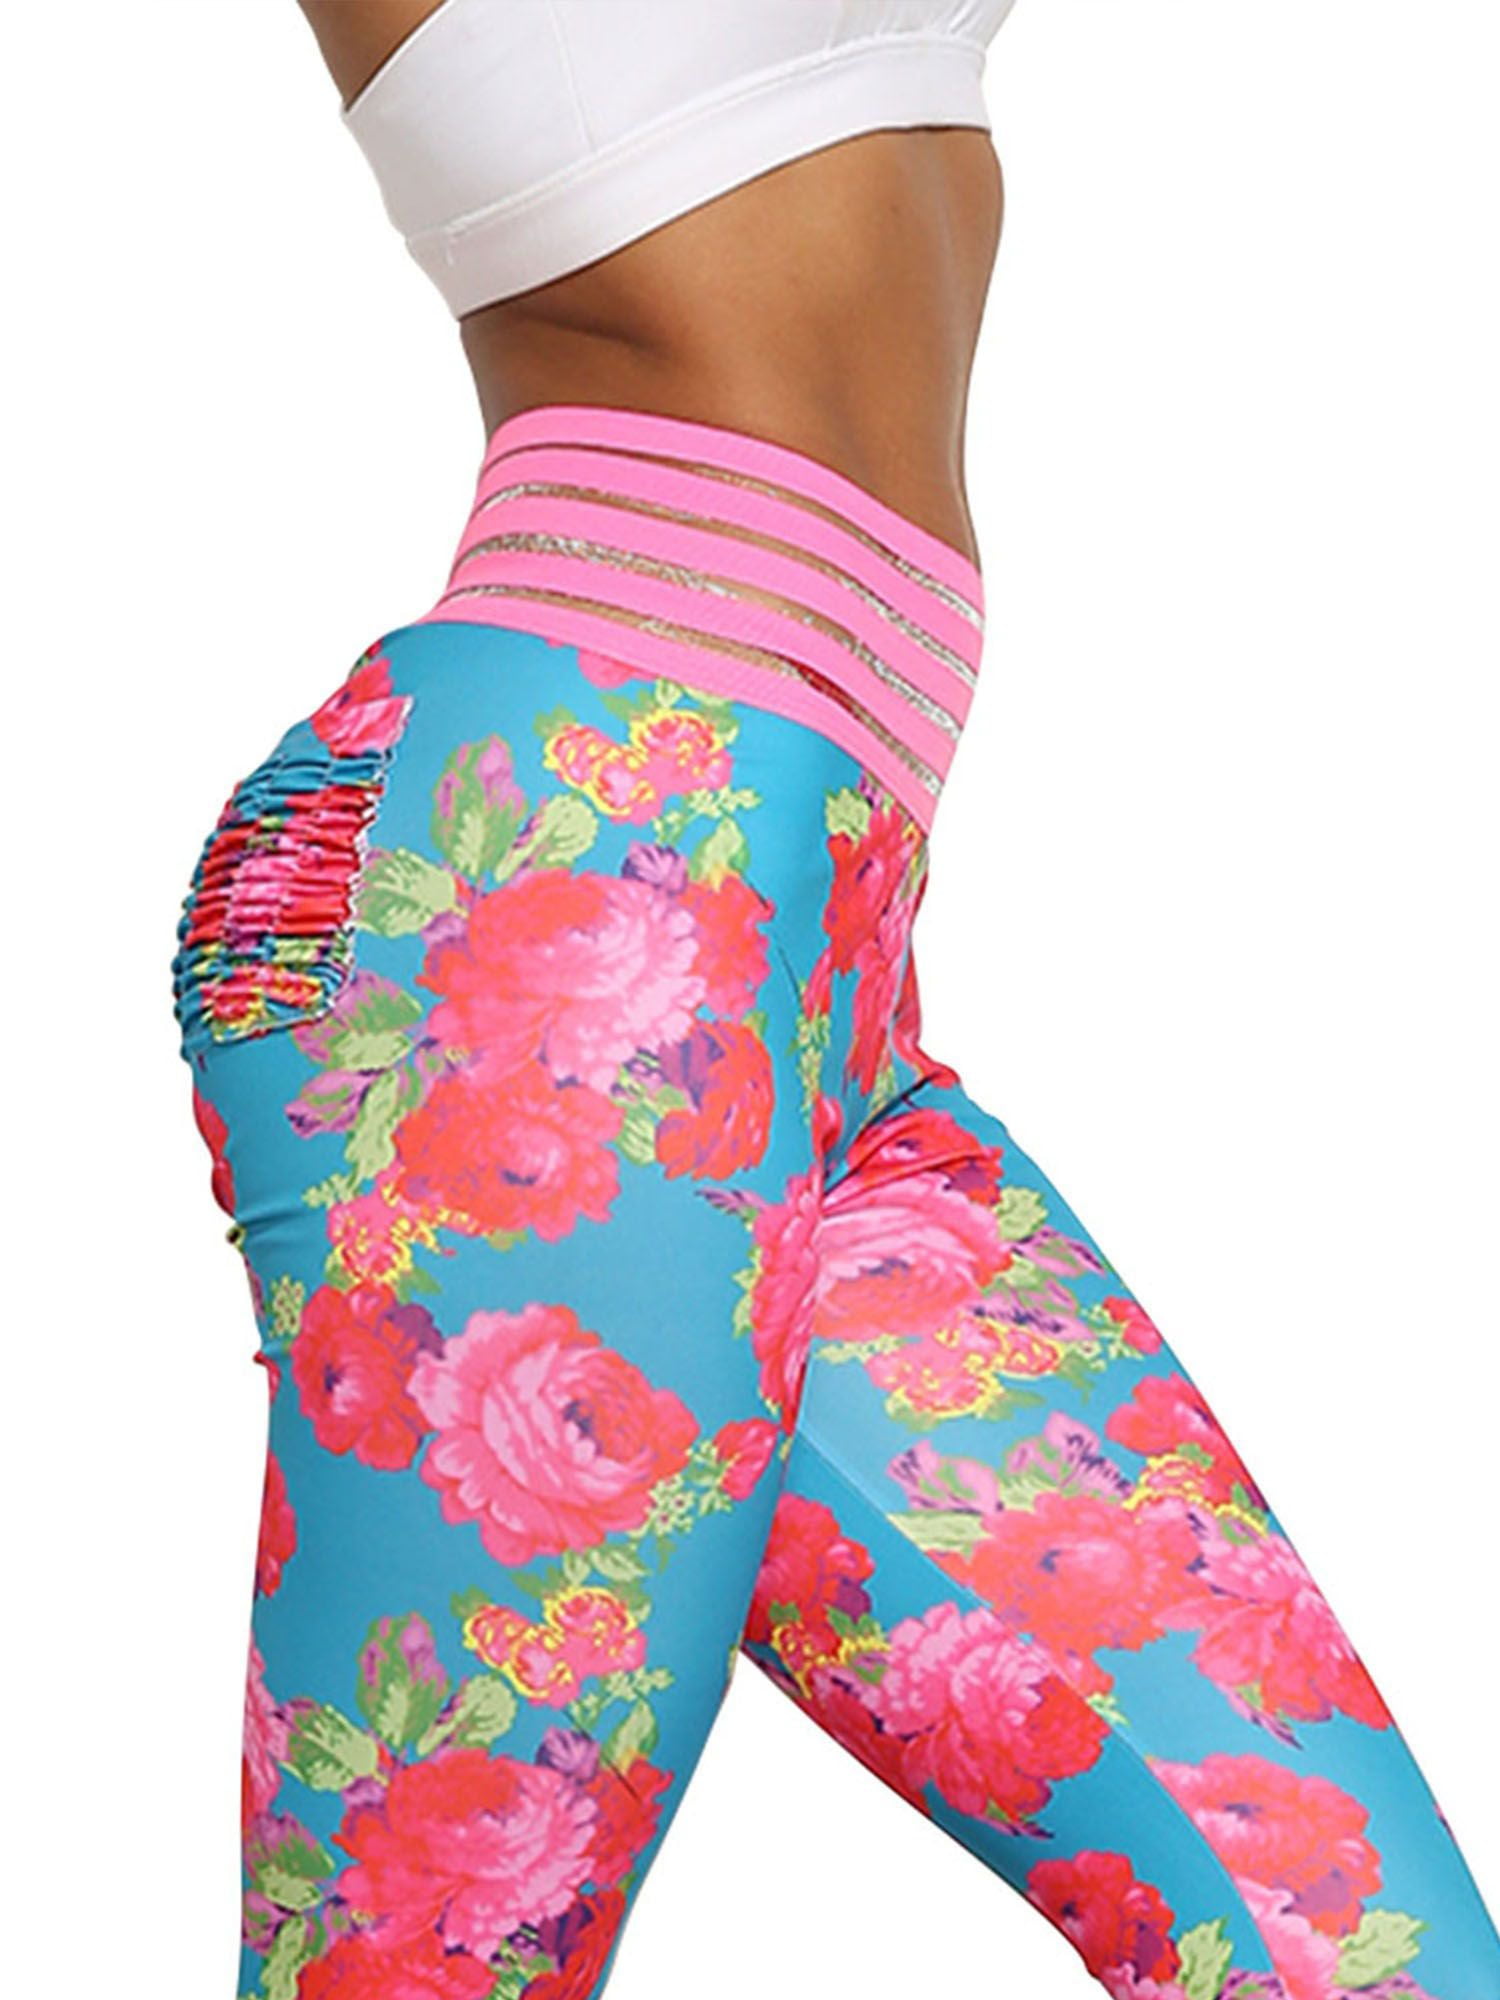 Floral Yoga Pants Booty Push up Pink Printed Leggings Flowers Watercolor  Sportswear Women Activewear Pattern Tights Shaping Sculpting Gym 